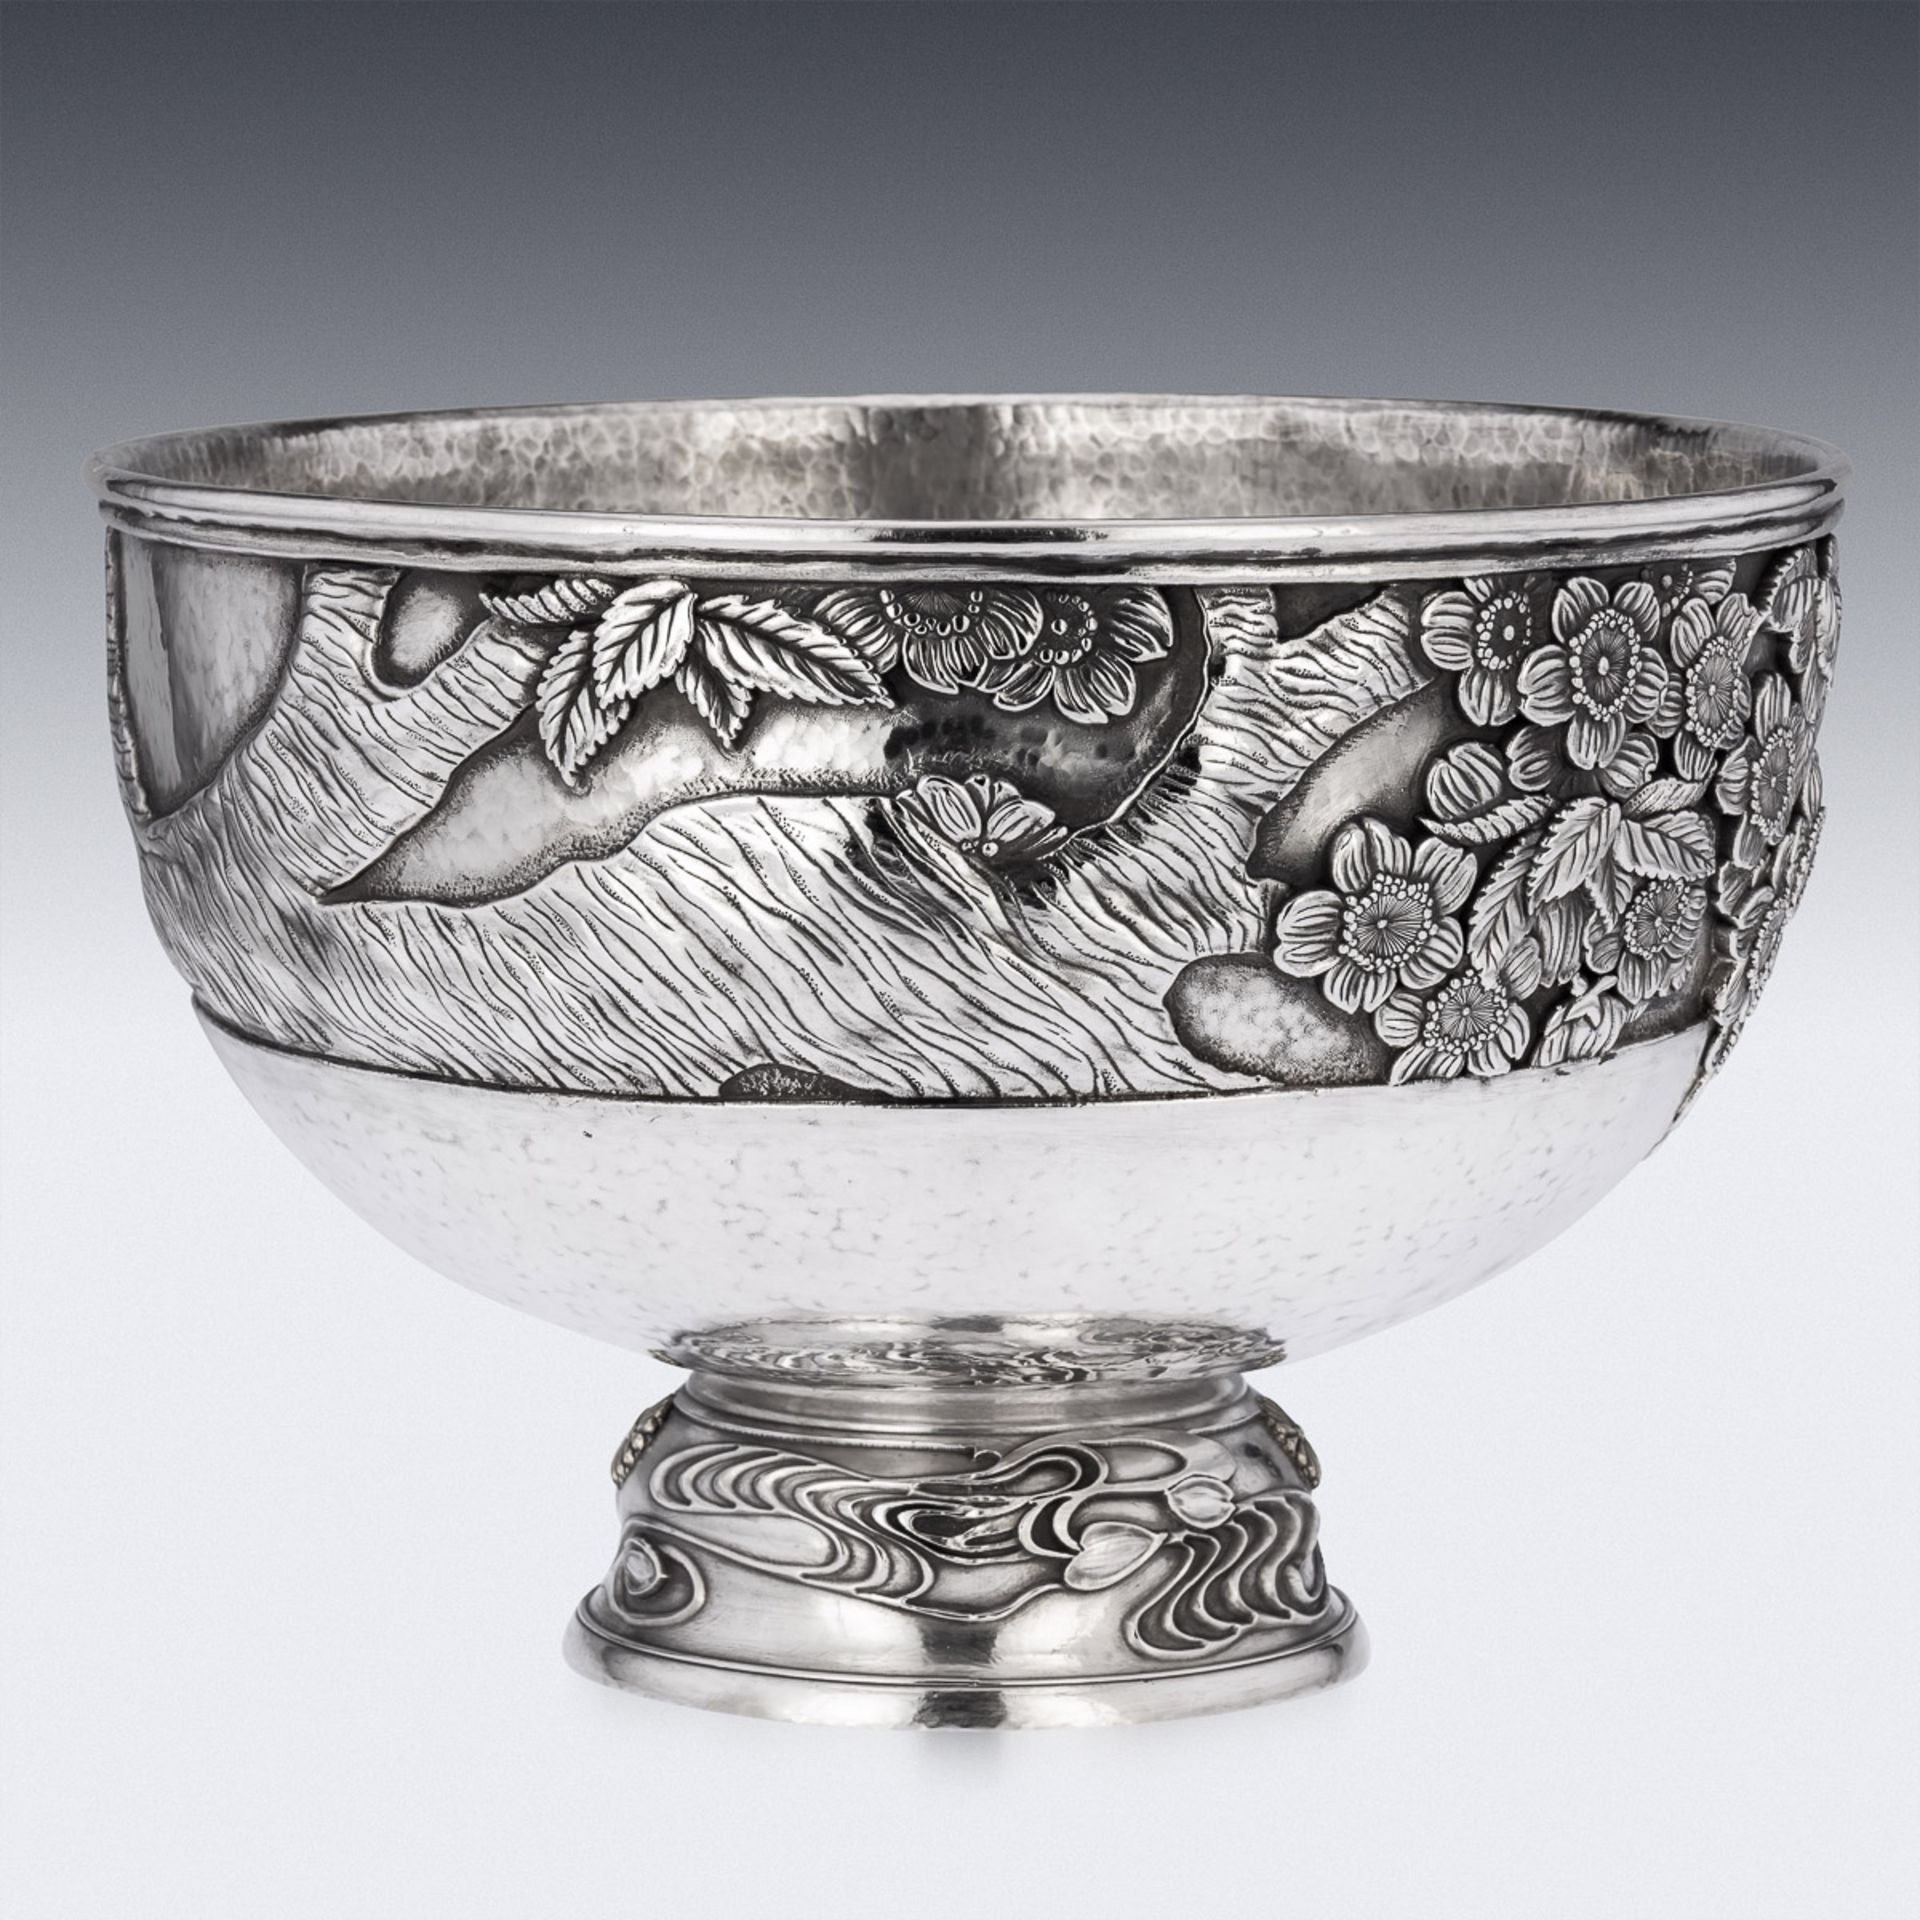 A MONUMENTAL LATE 19TH CENTURY JAPANESE SOLID SILVER BOWL C. 1900 - Image 2 of 17